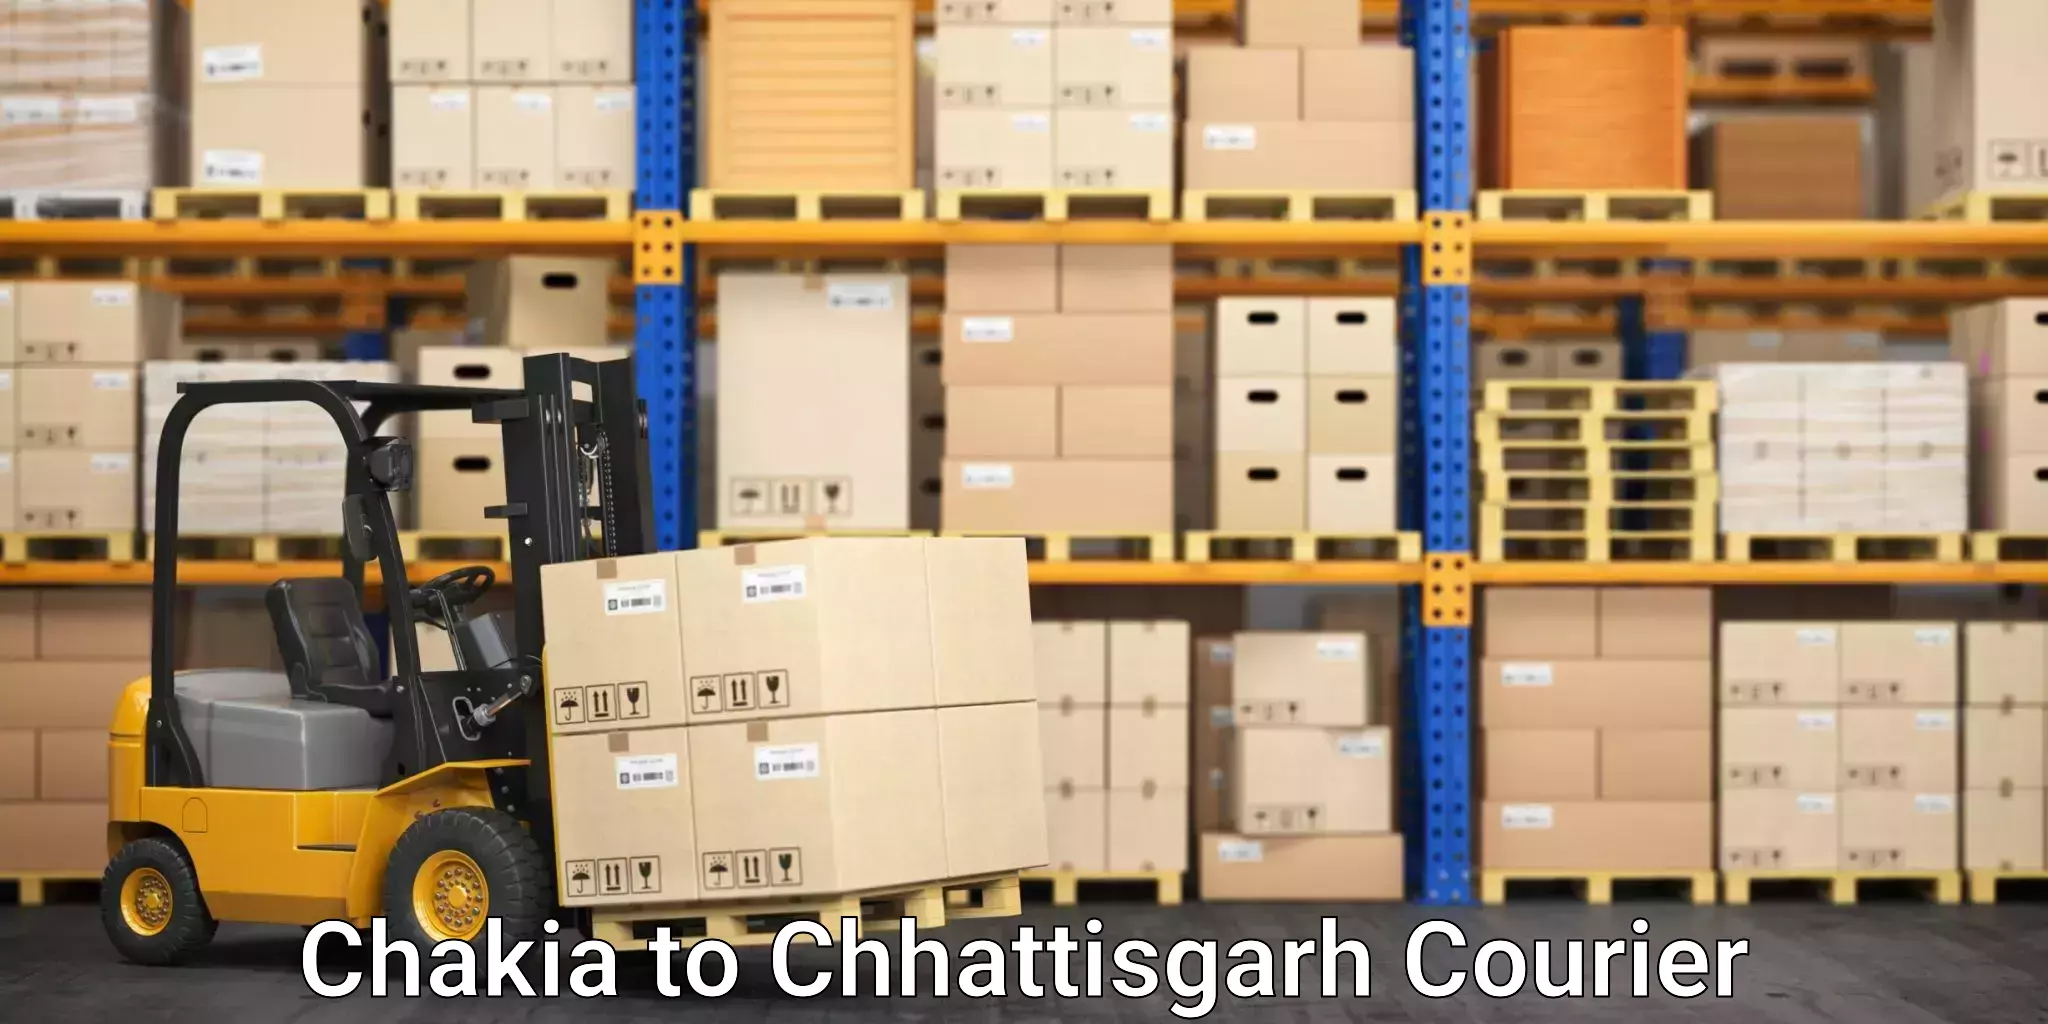 Furniture moving specialists Chakia to Mandhar